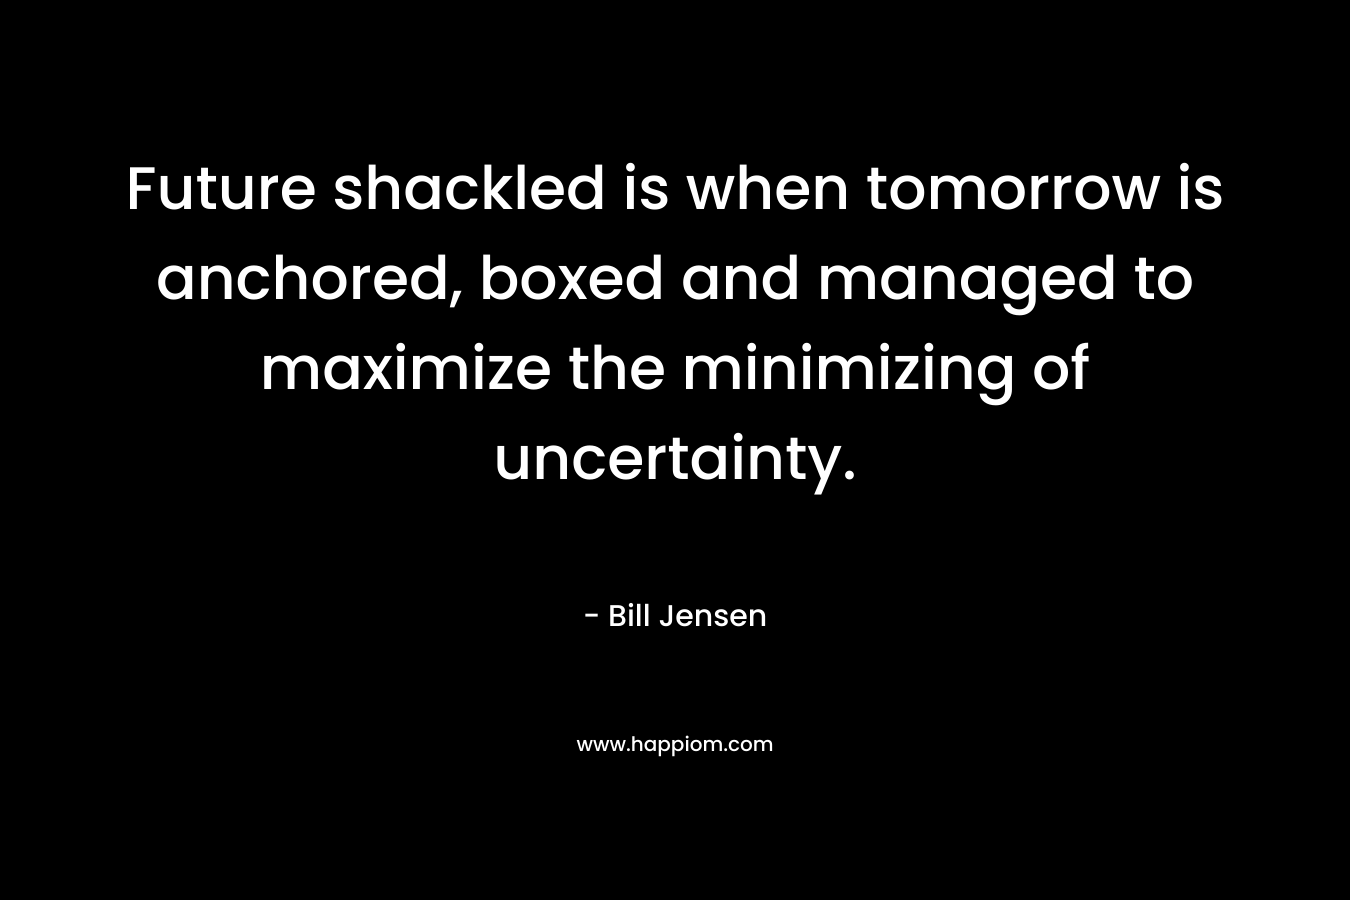 Future shackled is when tomorrow is anchored, boxed and managed to maximize the minimizing of uncertainty.